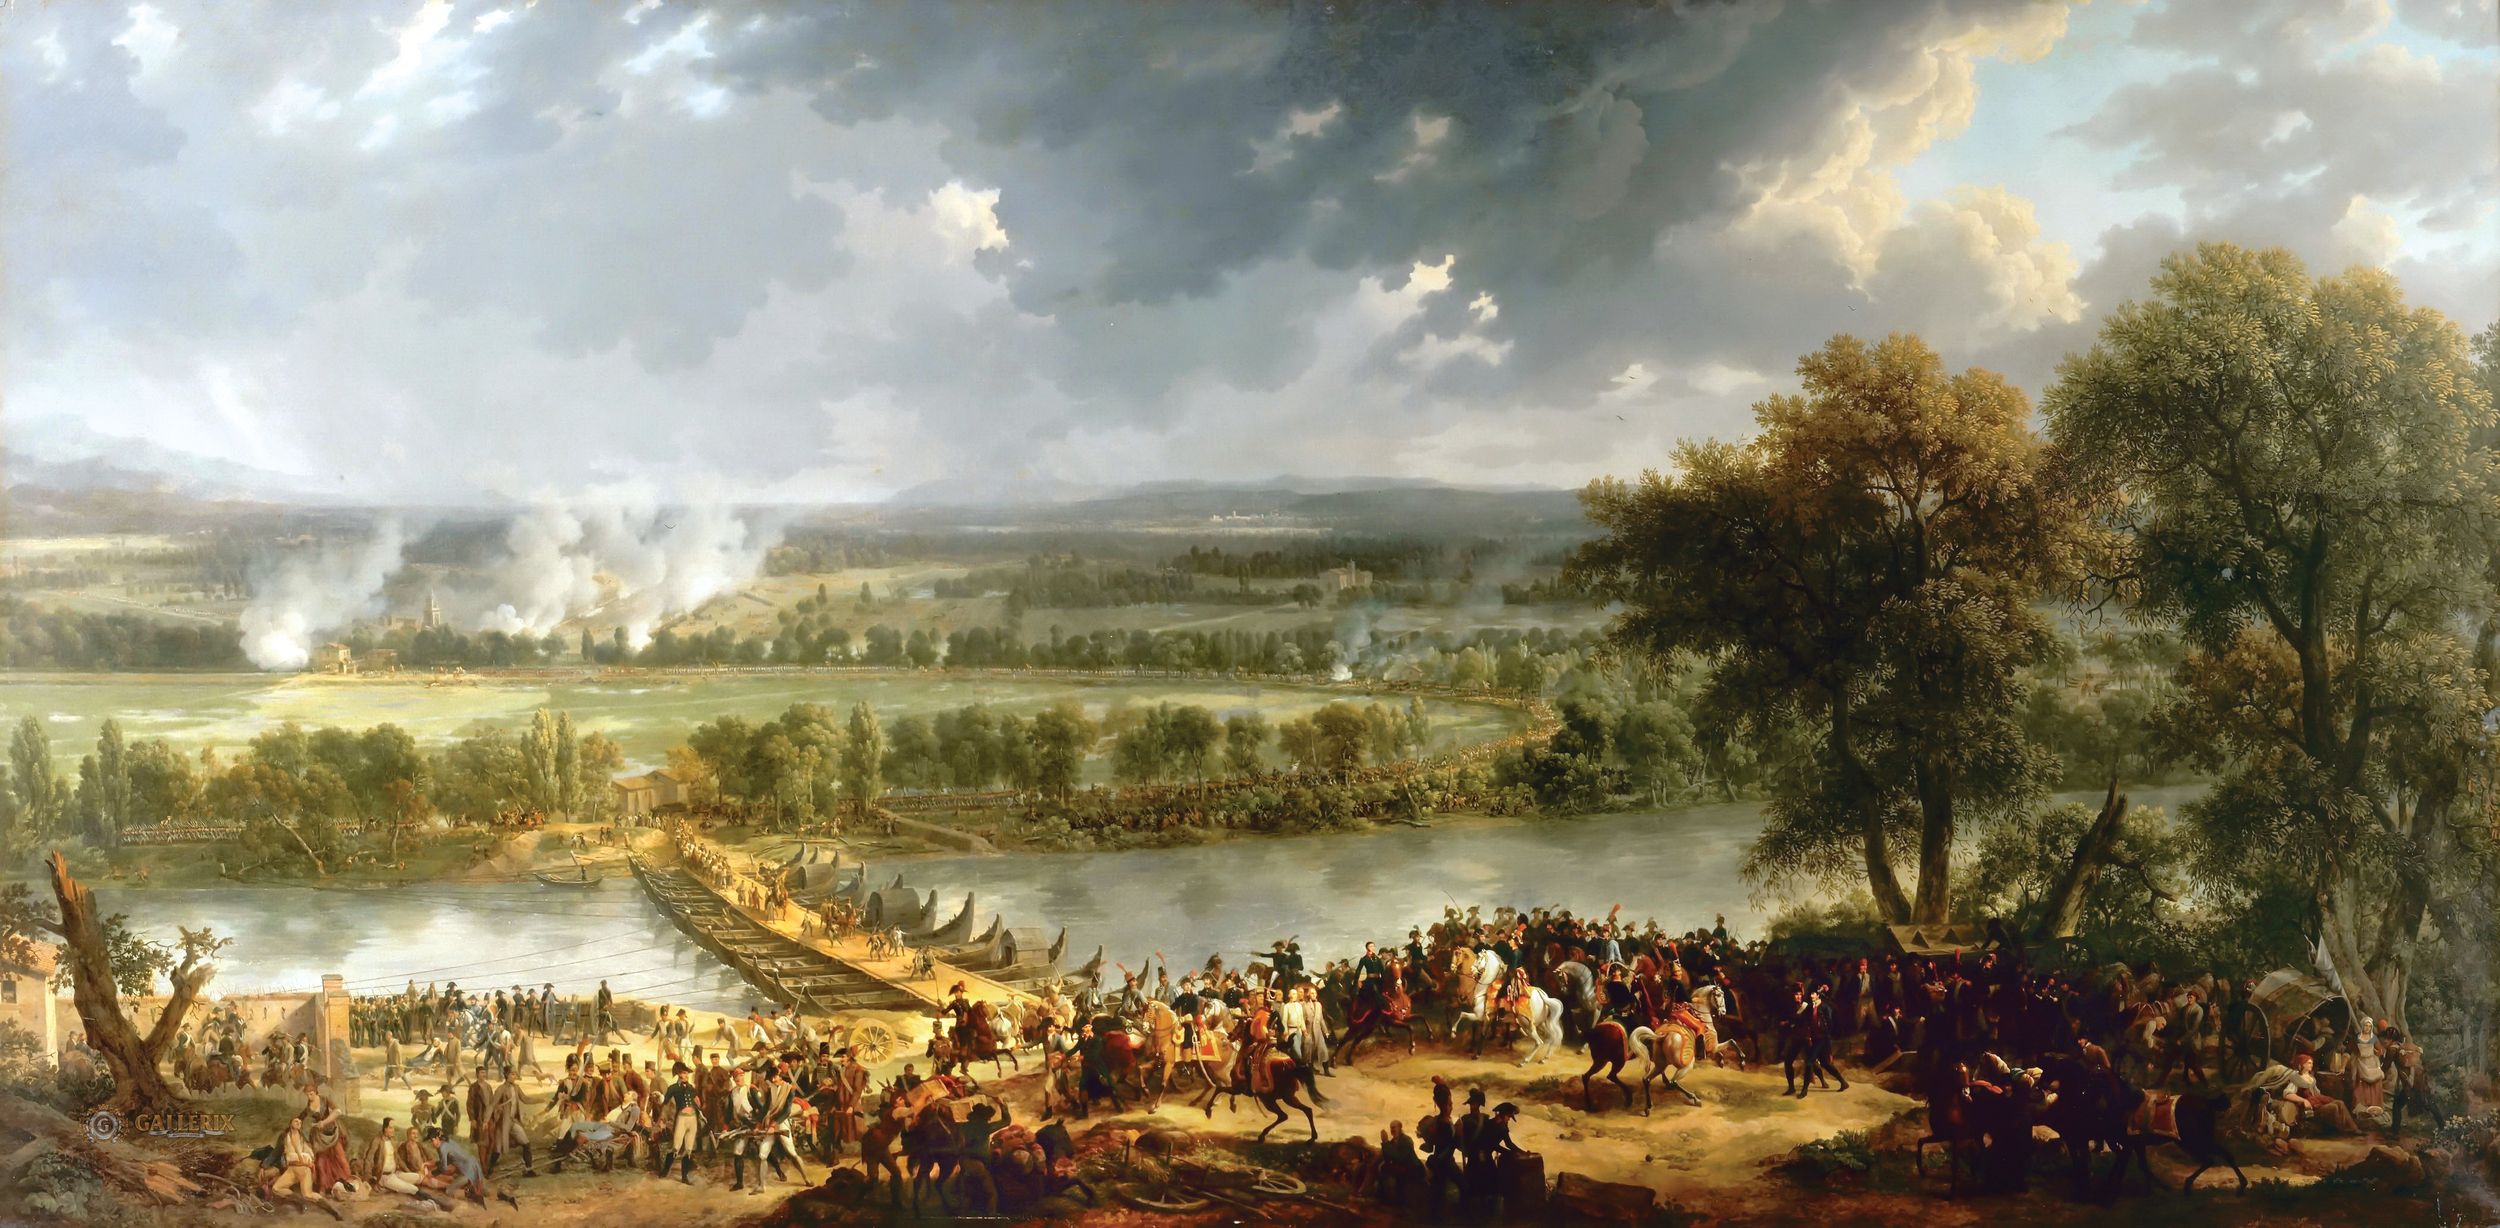 The Austrians proved capable of a stubborn defense at Arcole. The timely arrival of General Andre Massena’s division ultimately dislodged the Hapsburg troops.